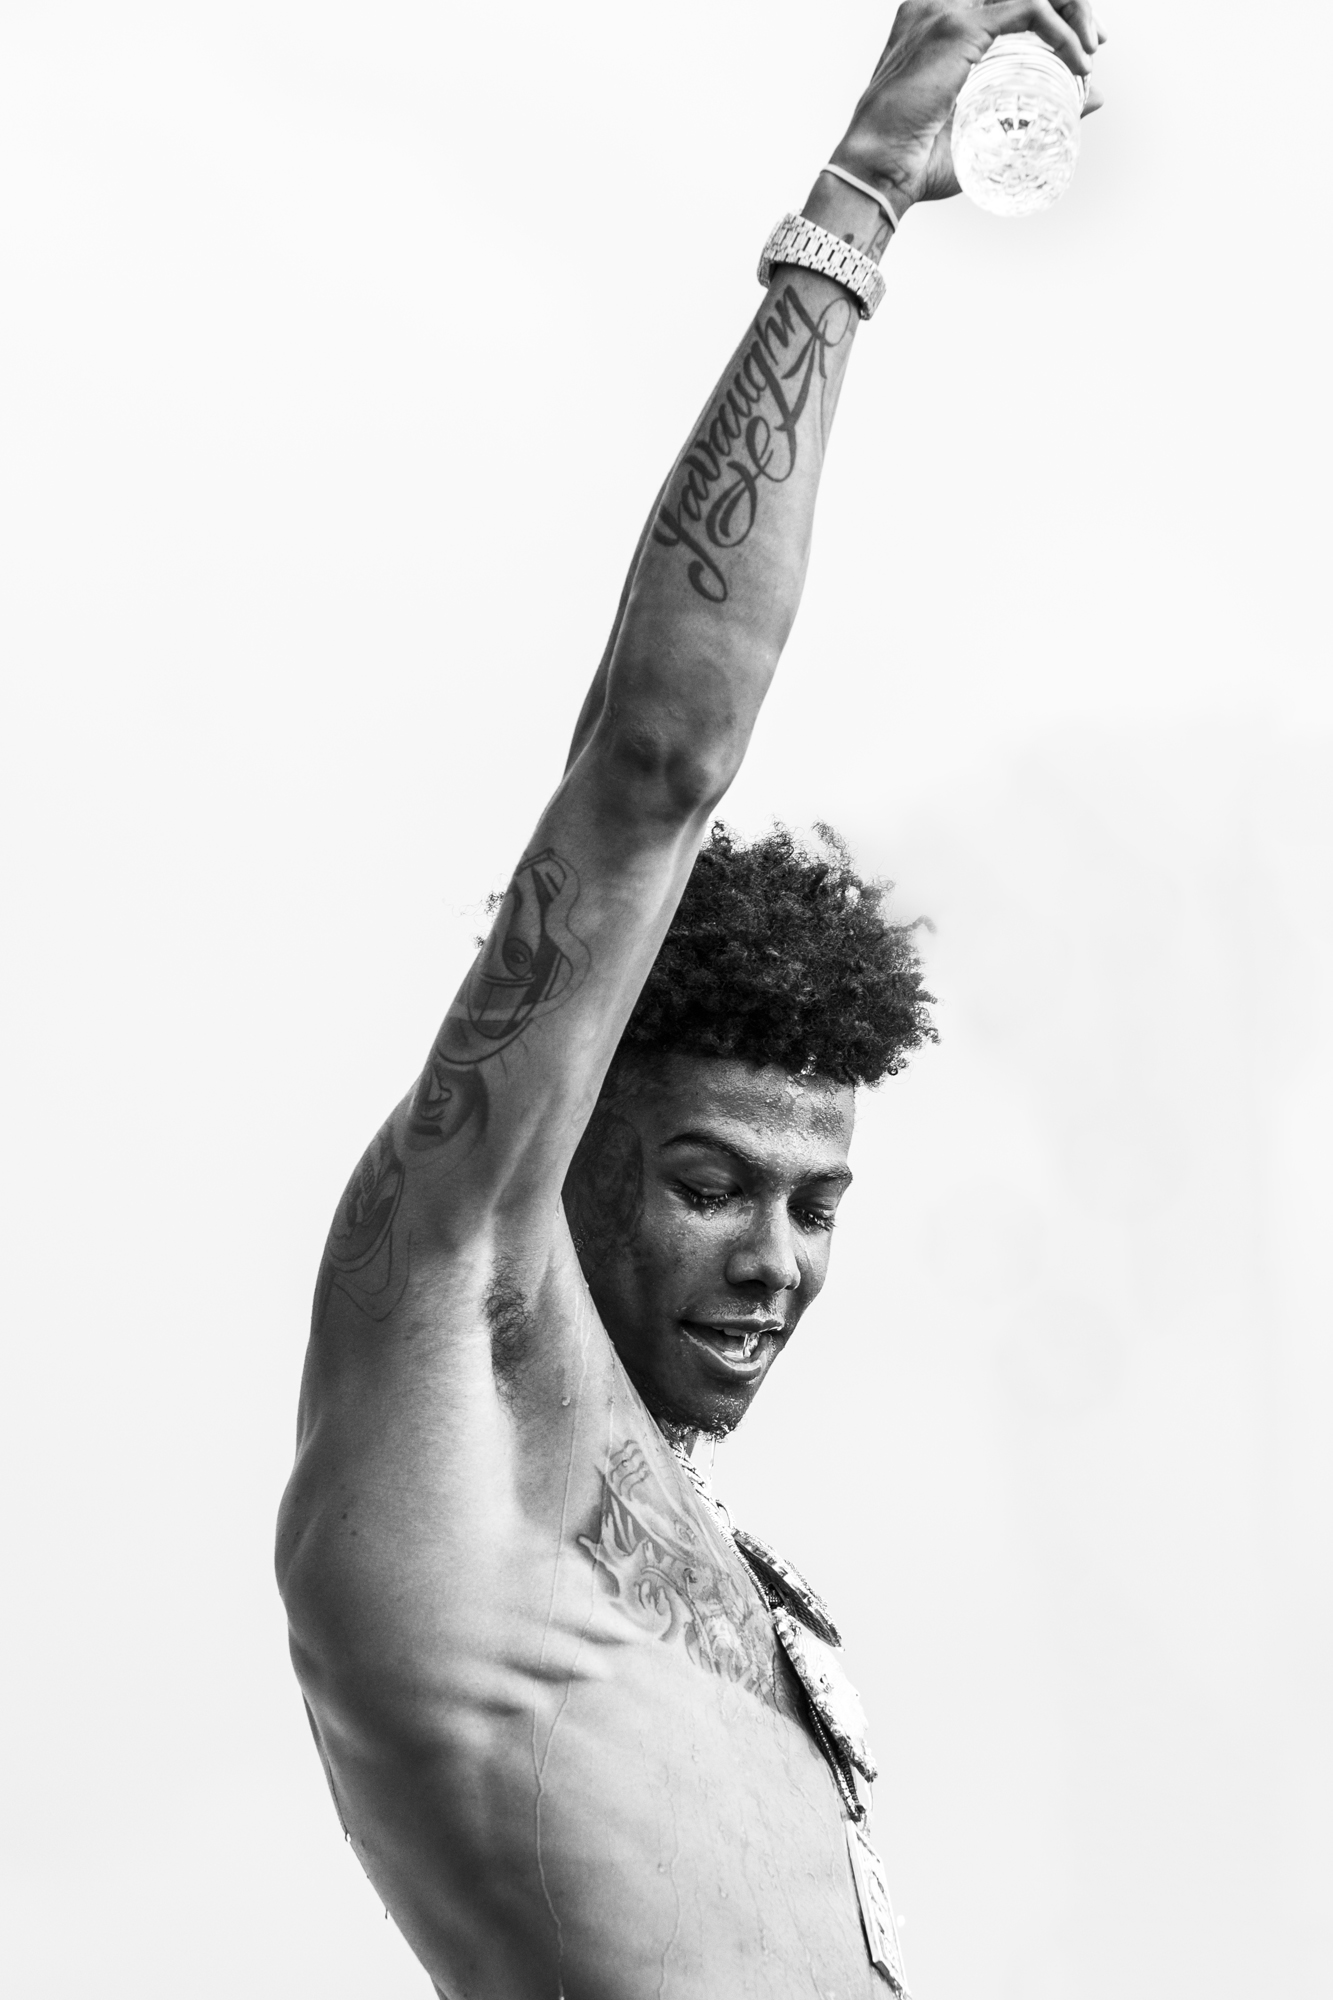 Blueface photographed by Aviva Klein- copyright 2021